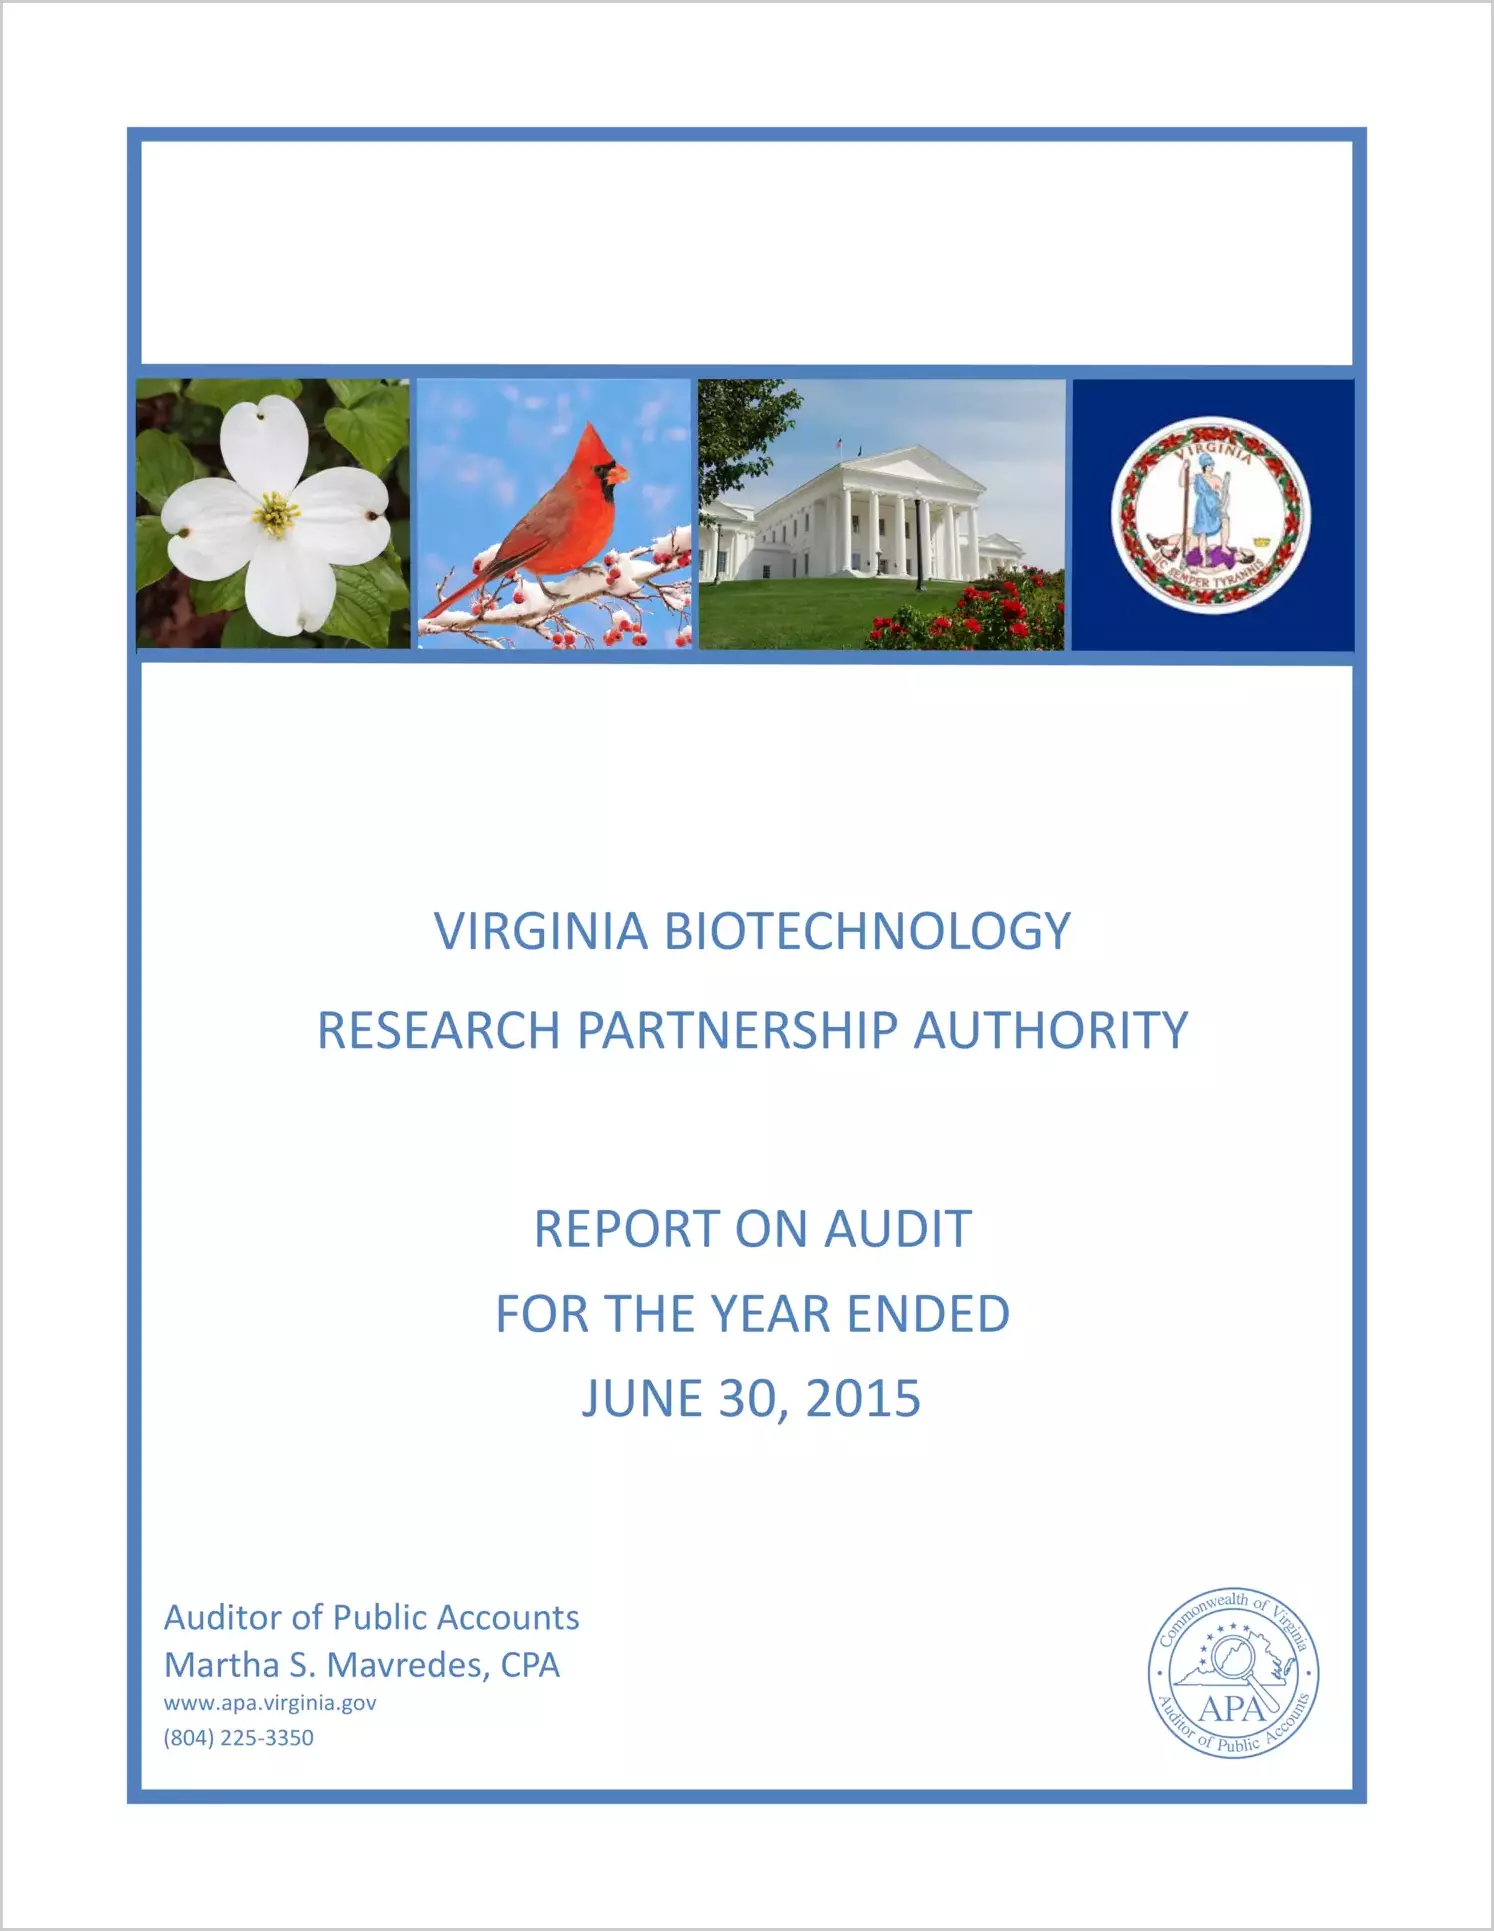 Virginia Biotechnology Research Partnership Authority for the year ended June 30, 2015